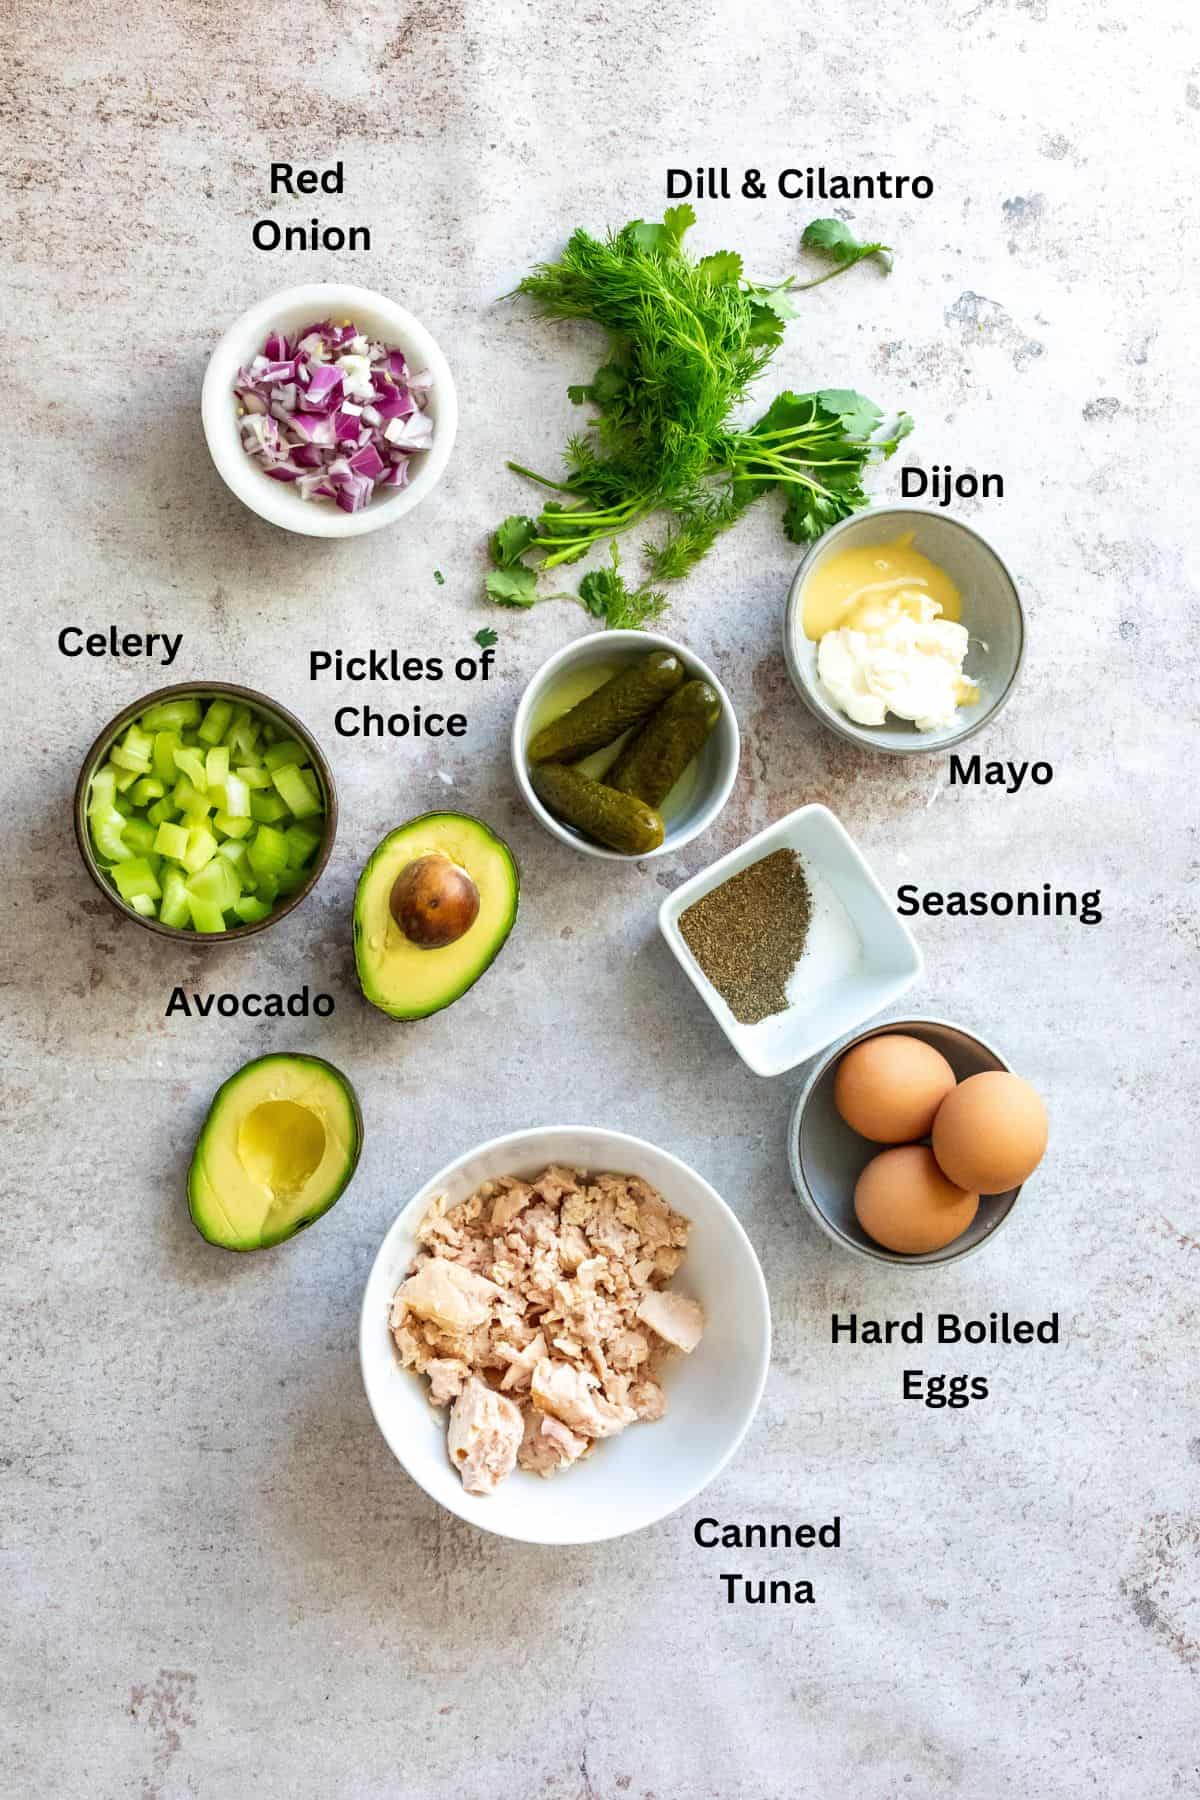 Ingredients needed for recipe to make egg and tuna salad sandwiches.